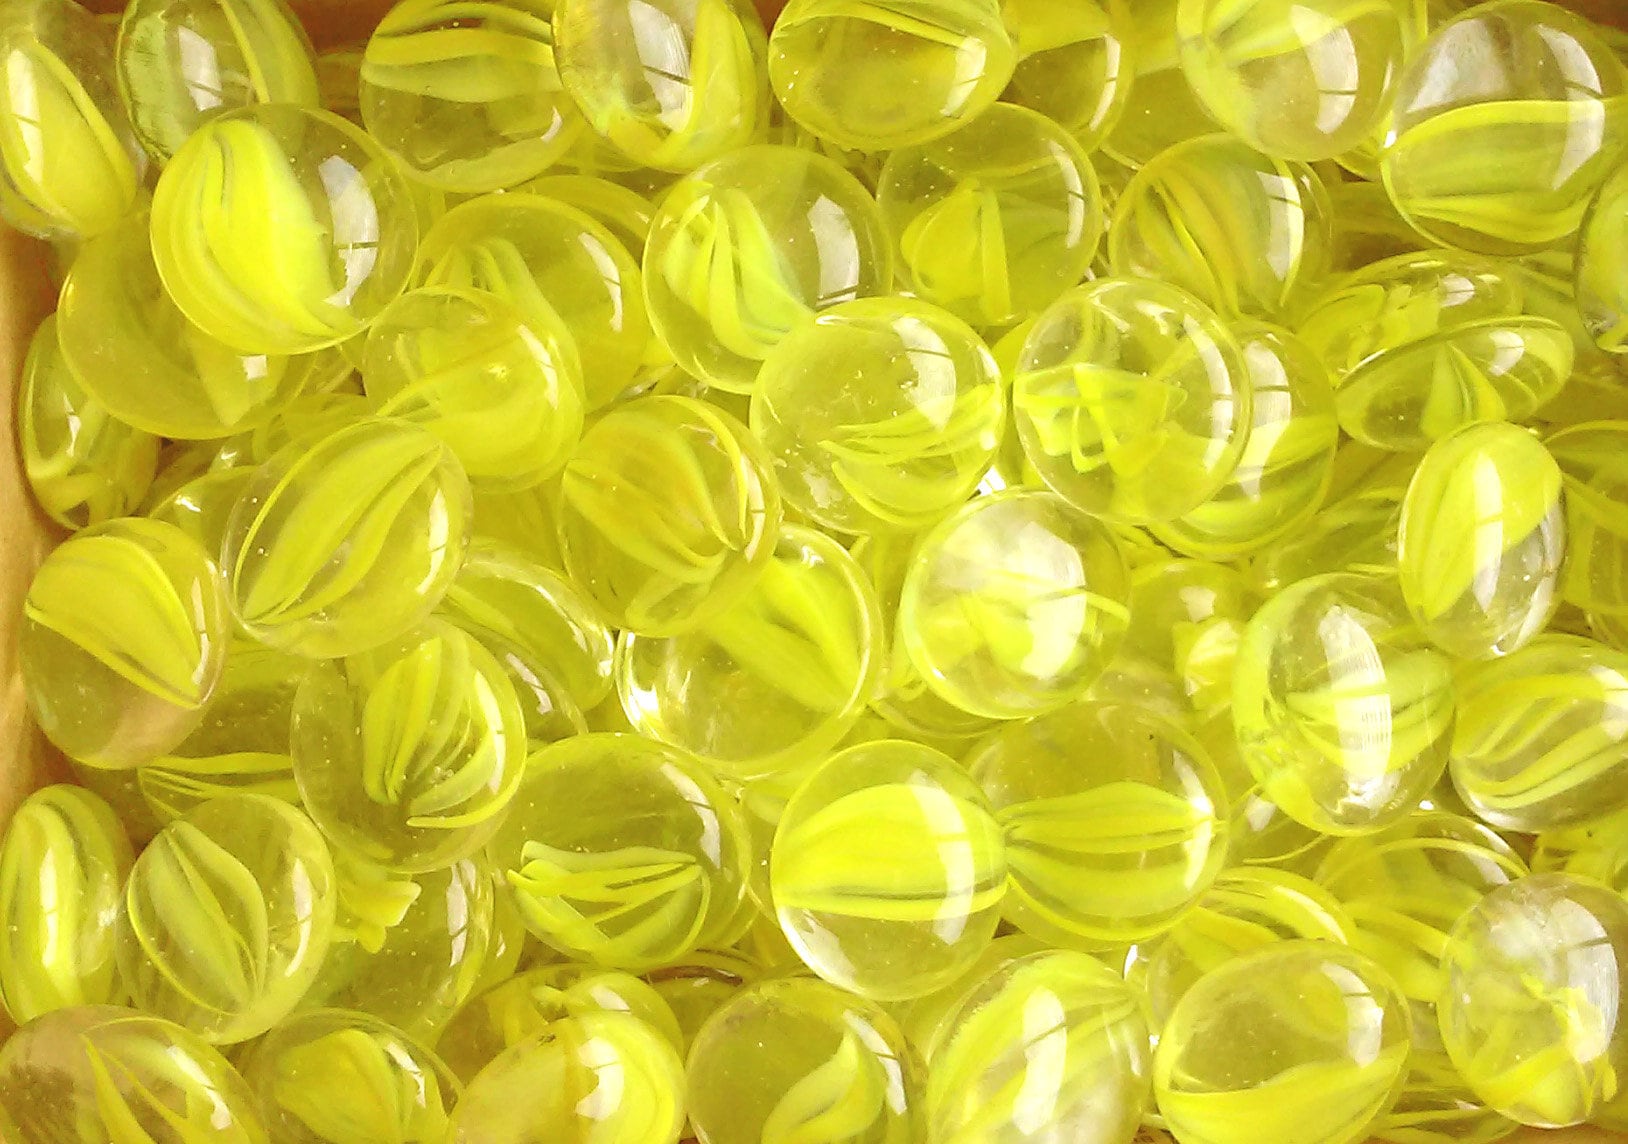 120 Vintage Glass Marbles in Yellow and Blue, 70 Yellow